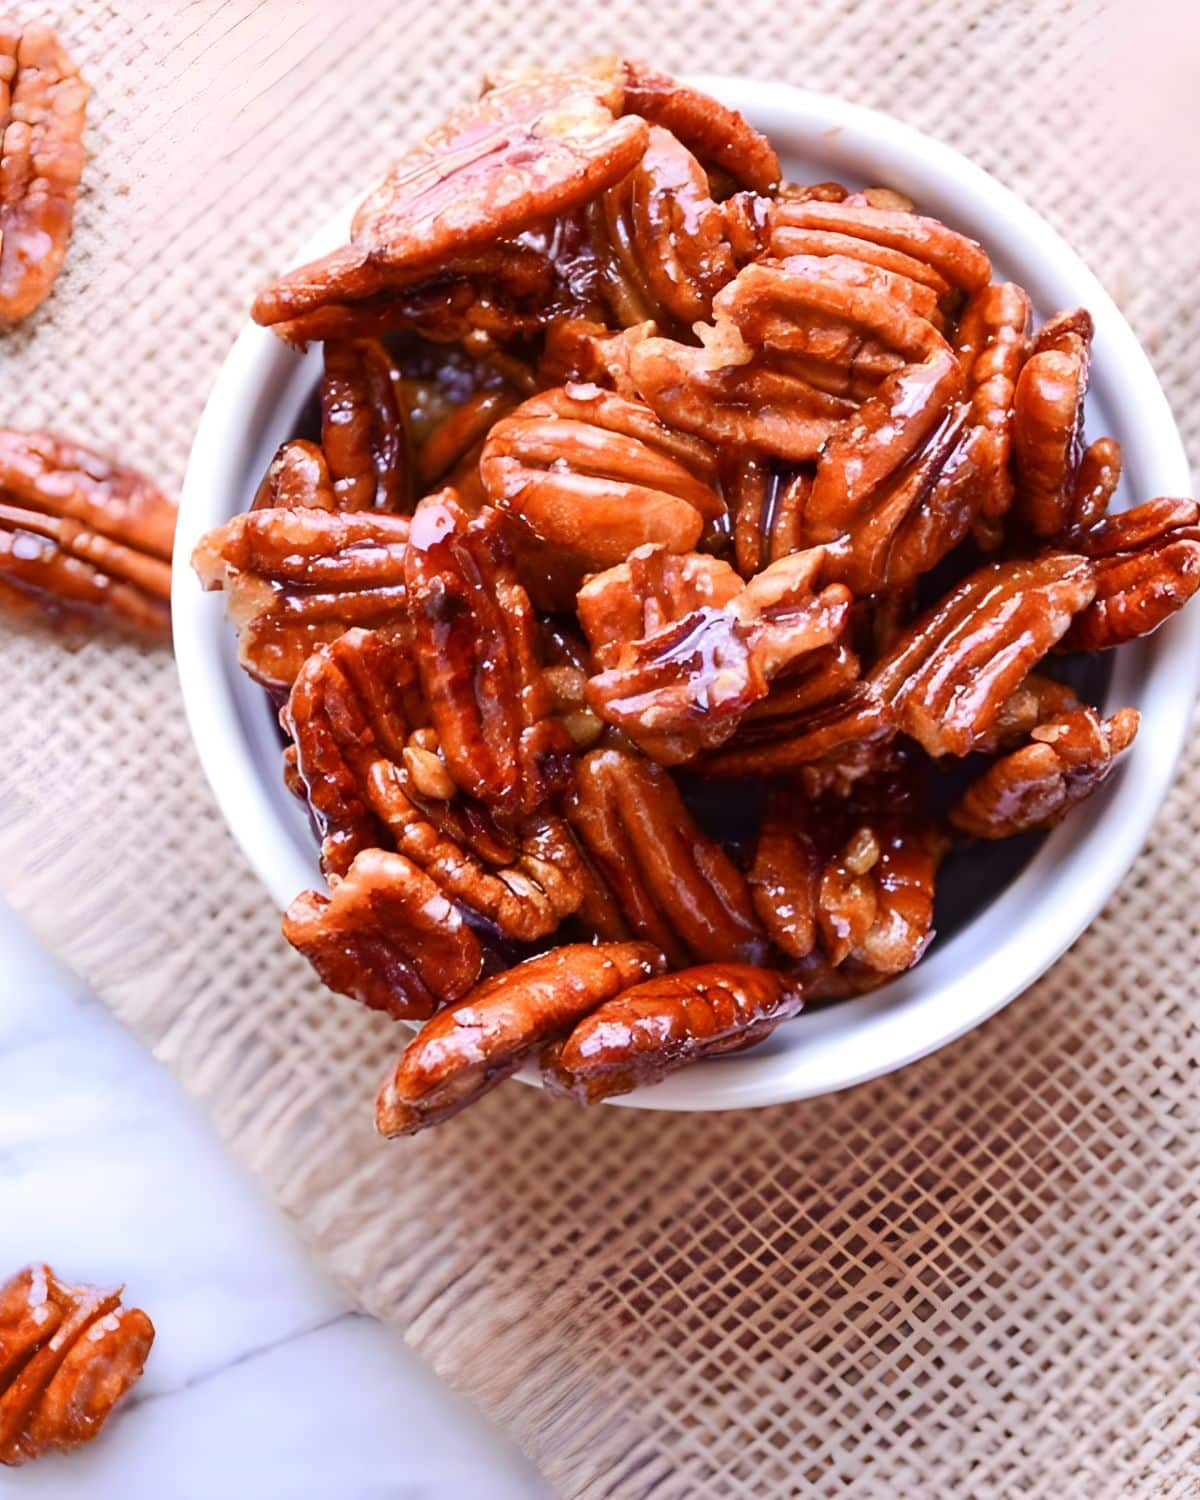 A dish of glazed spiced pecans.